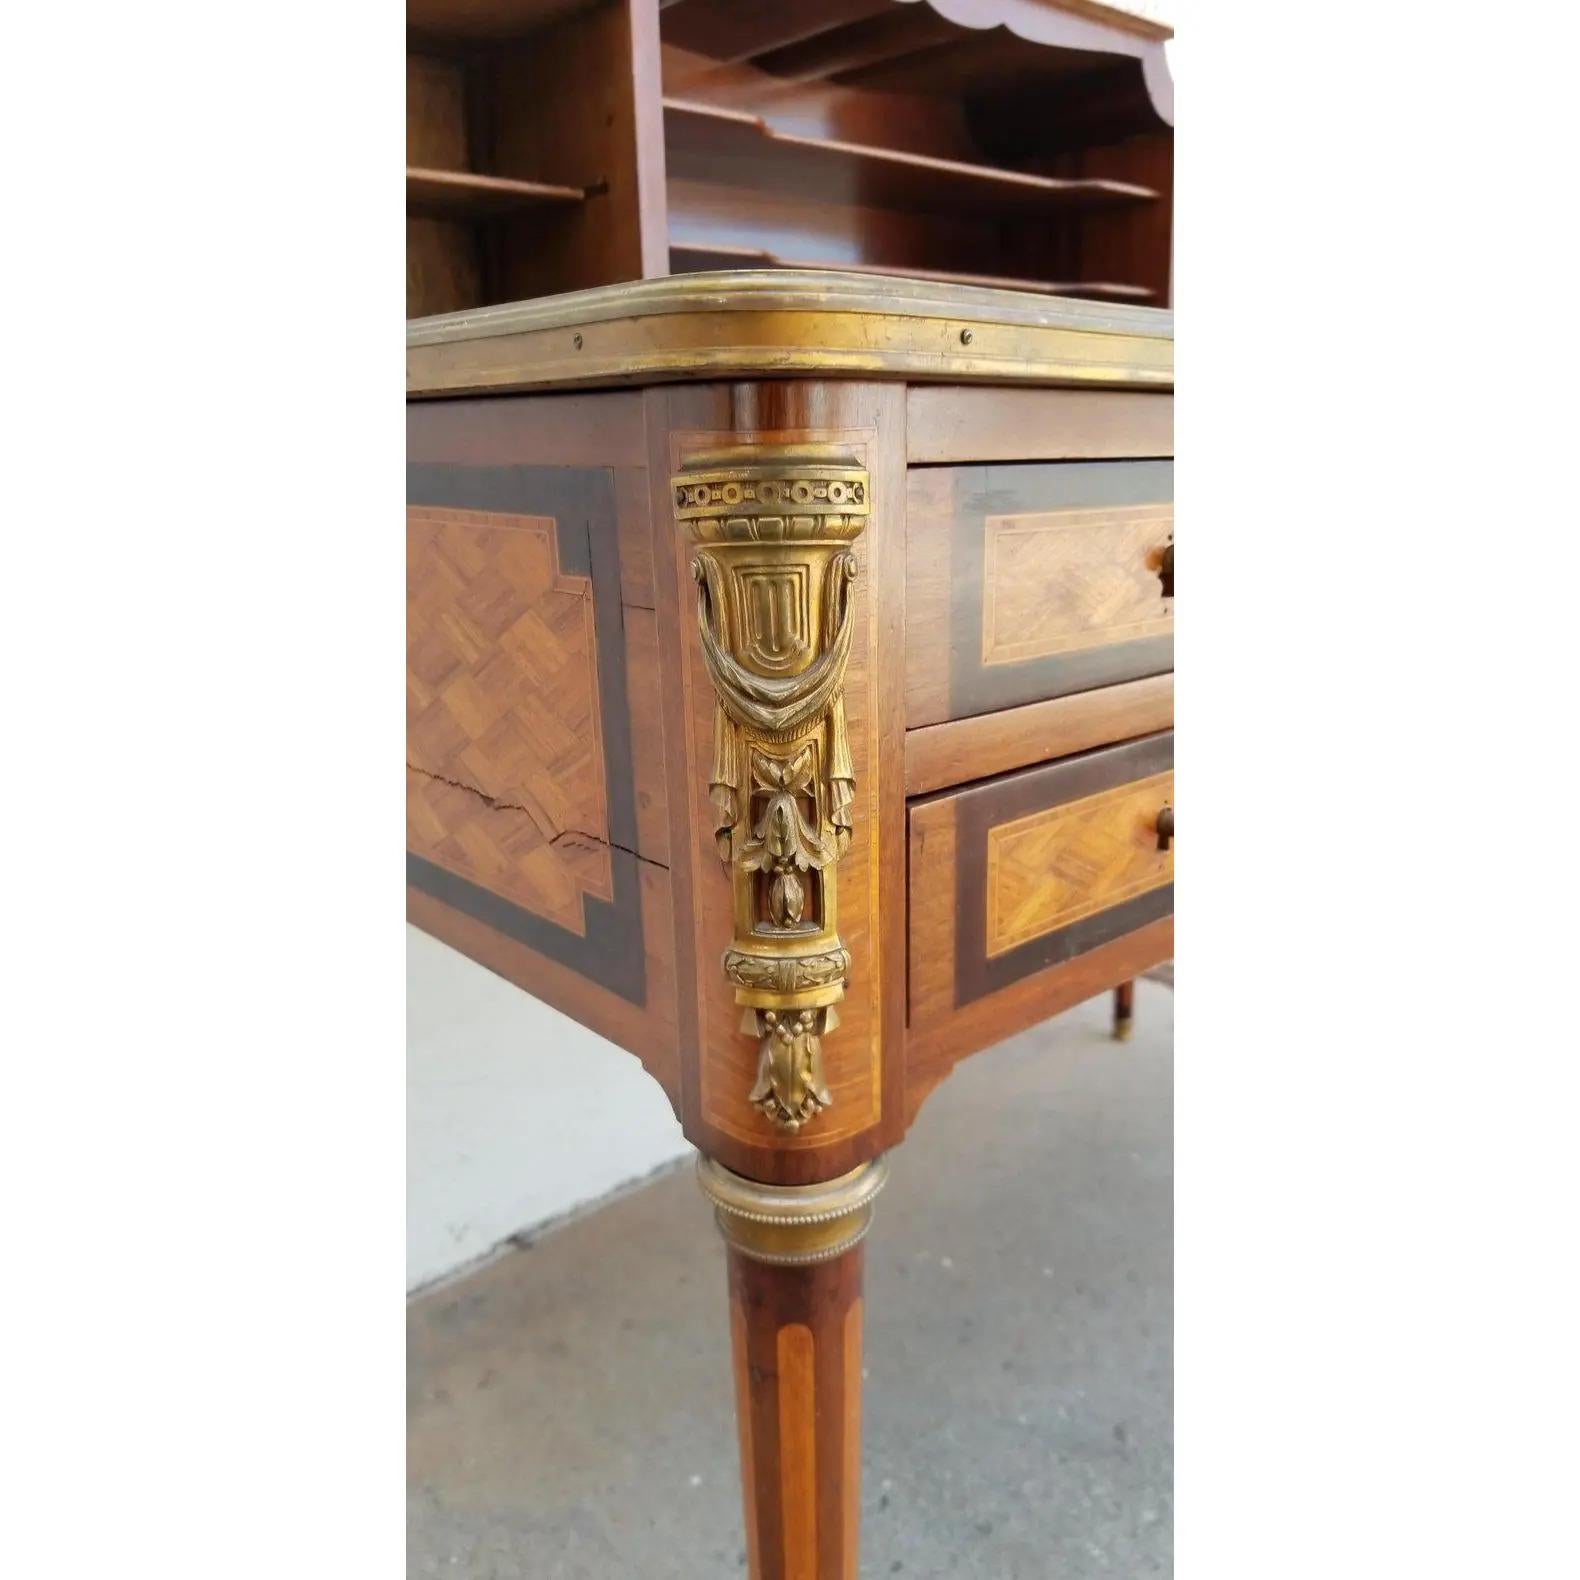 Early 20th century parquetry desk or writing table with bronze ormolu detail and tooled leather writing surface. Fine detail to gilded bronze mounts, beveled marble top. Five drawers, two shelves and tambour storage cabinets. Beautiful original